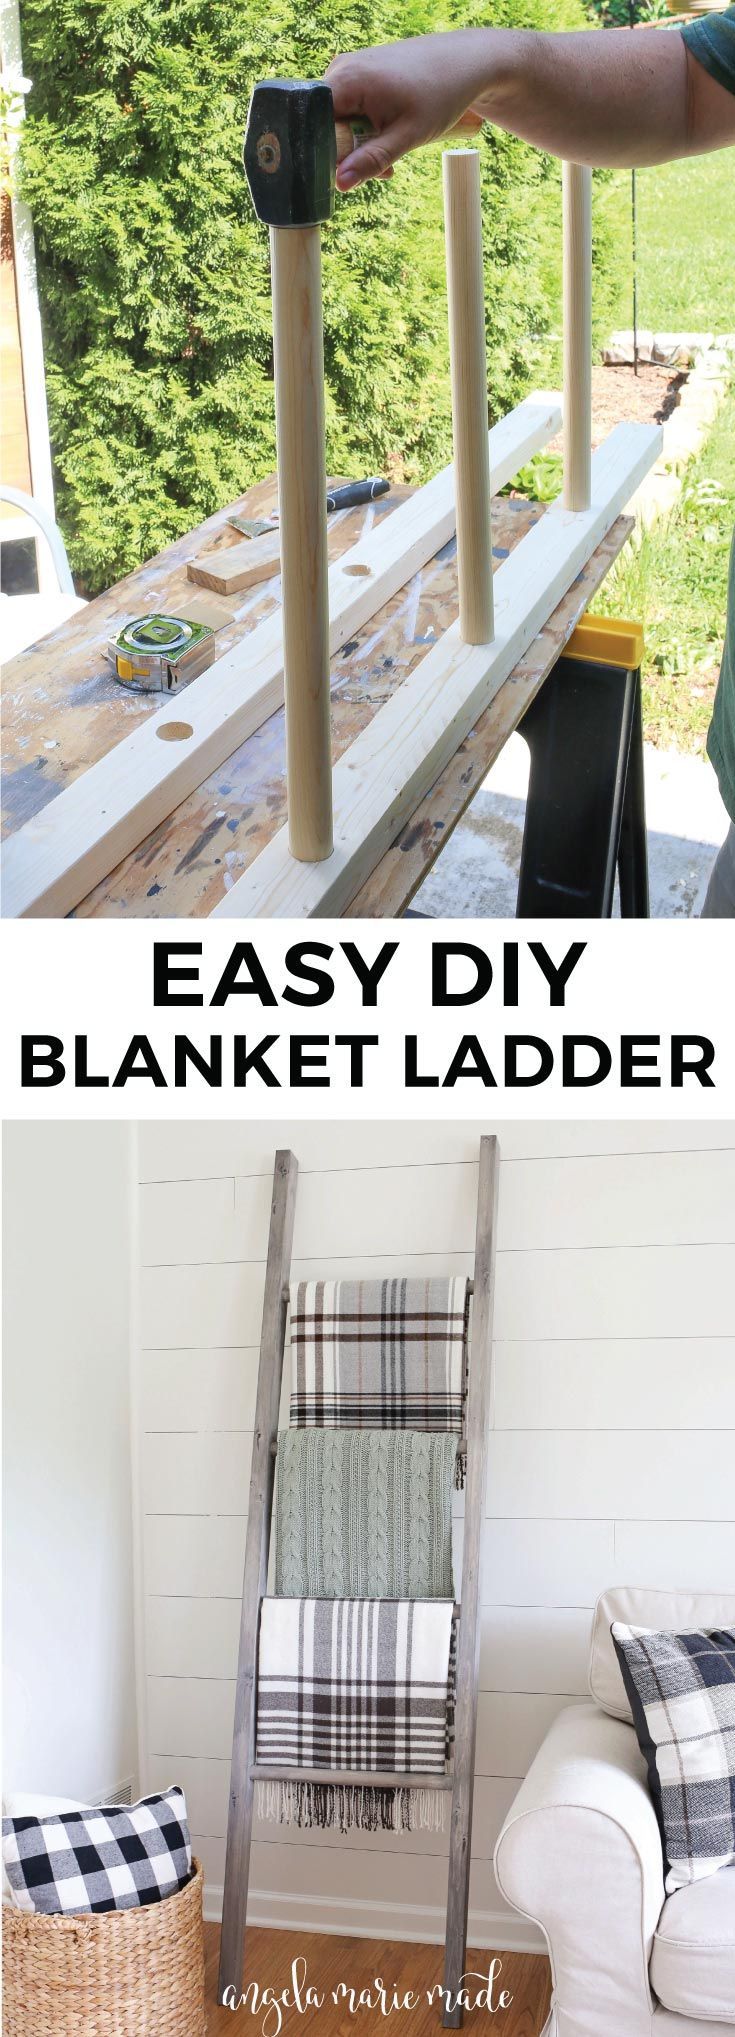 How to easily and quickly build a $15 blanket ladder. This blanket ladder is cozy, functional, and cute living room decor!